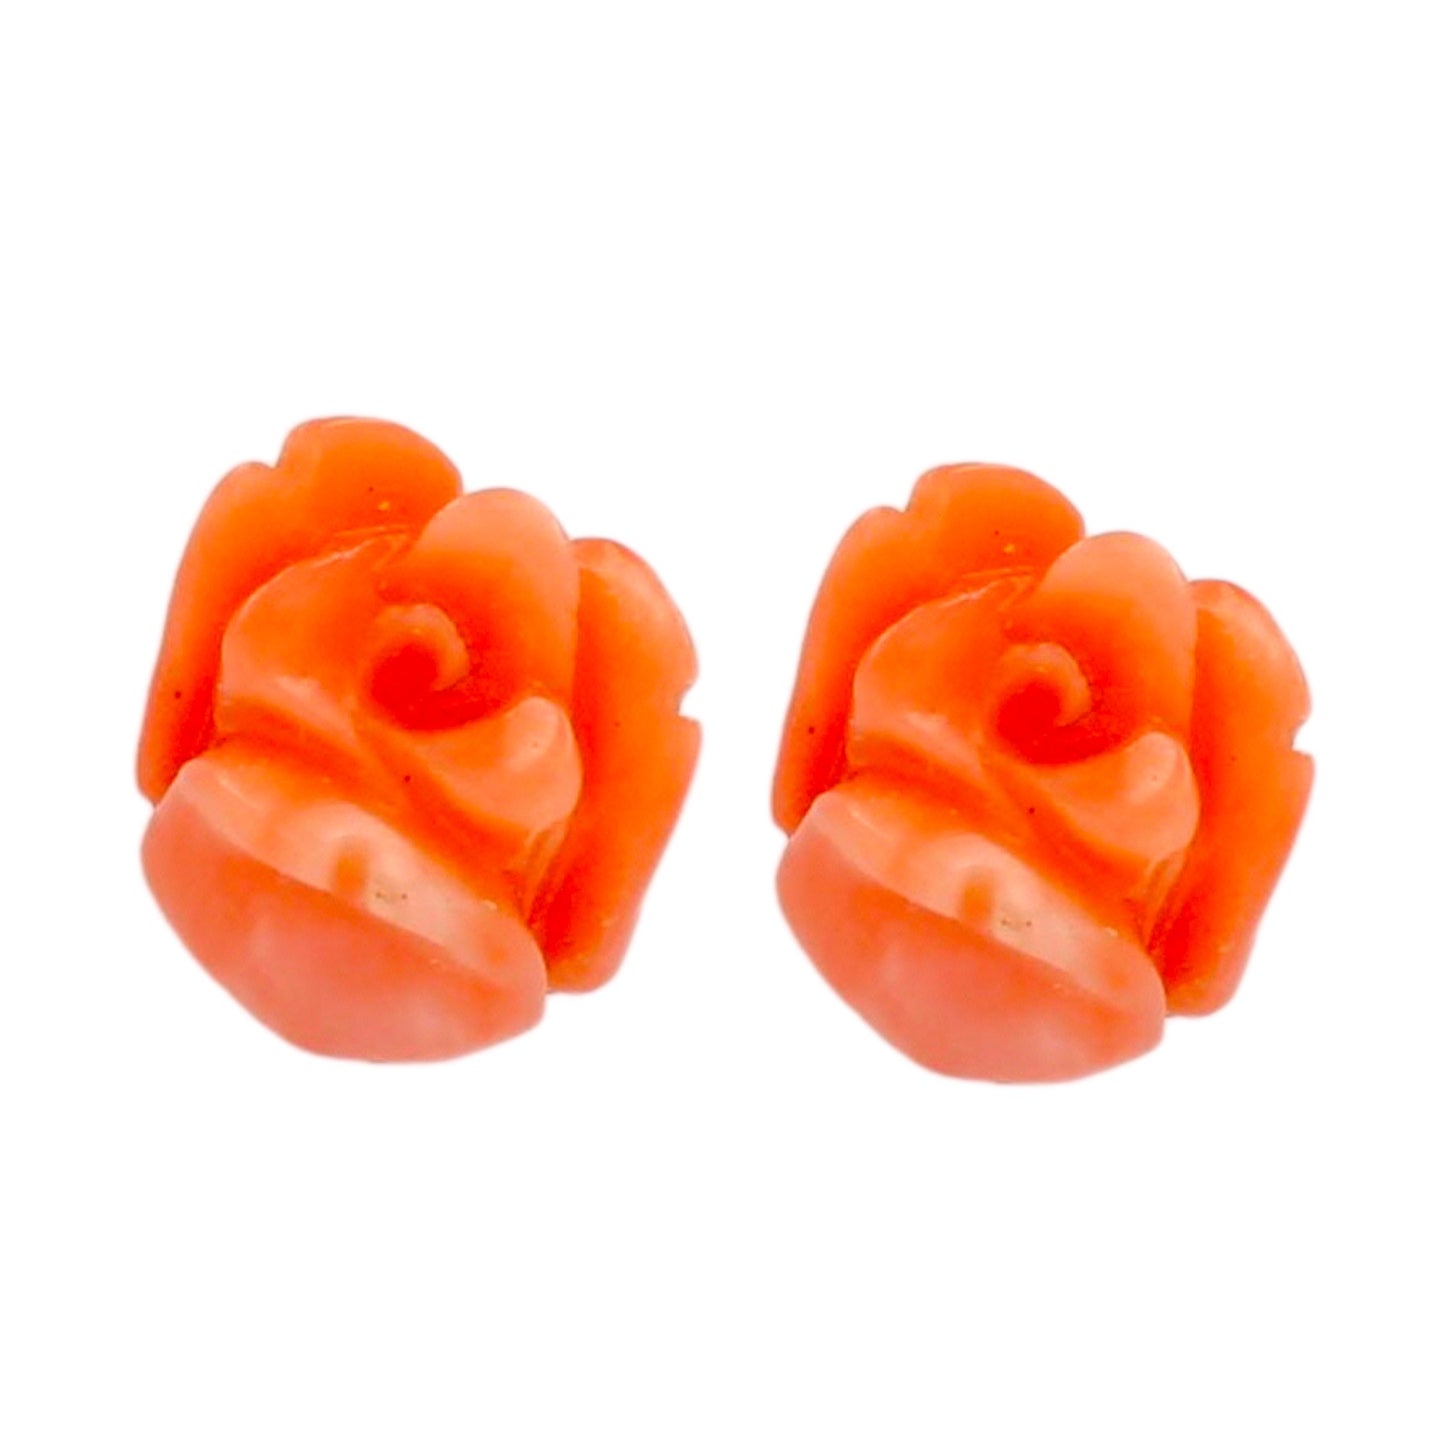 14K Yellow gold red coral carving rose studs earrings